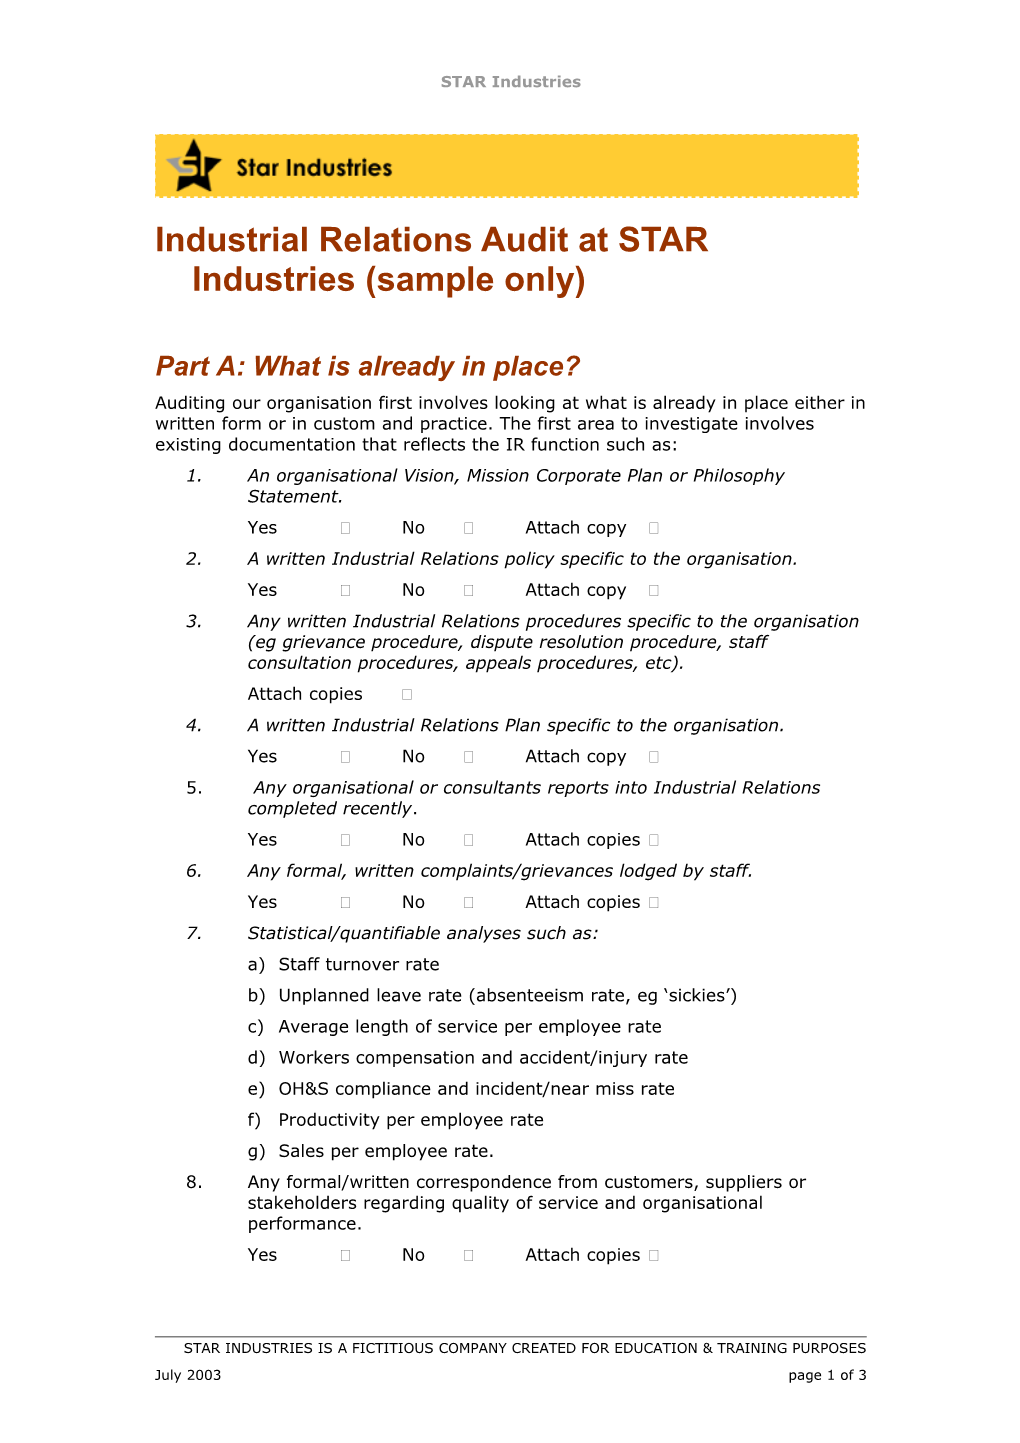 Industrial Relations Audit at STAR Industries (Sample Only)